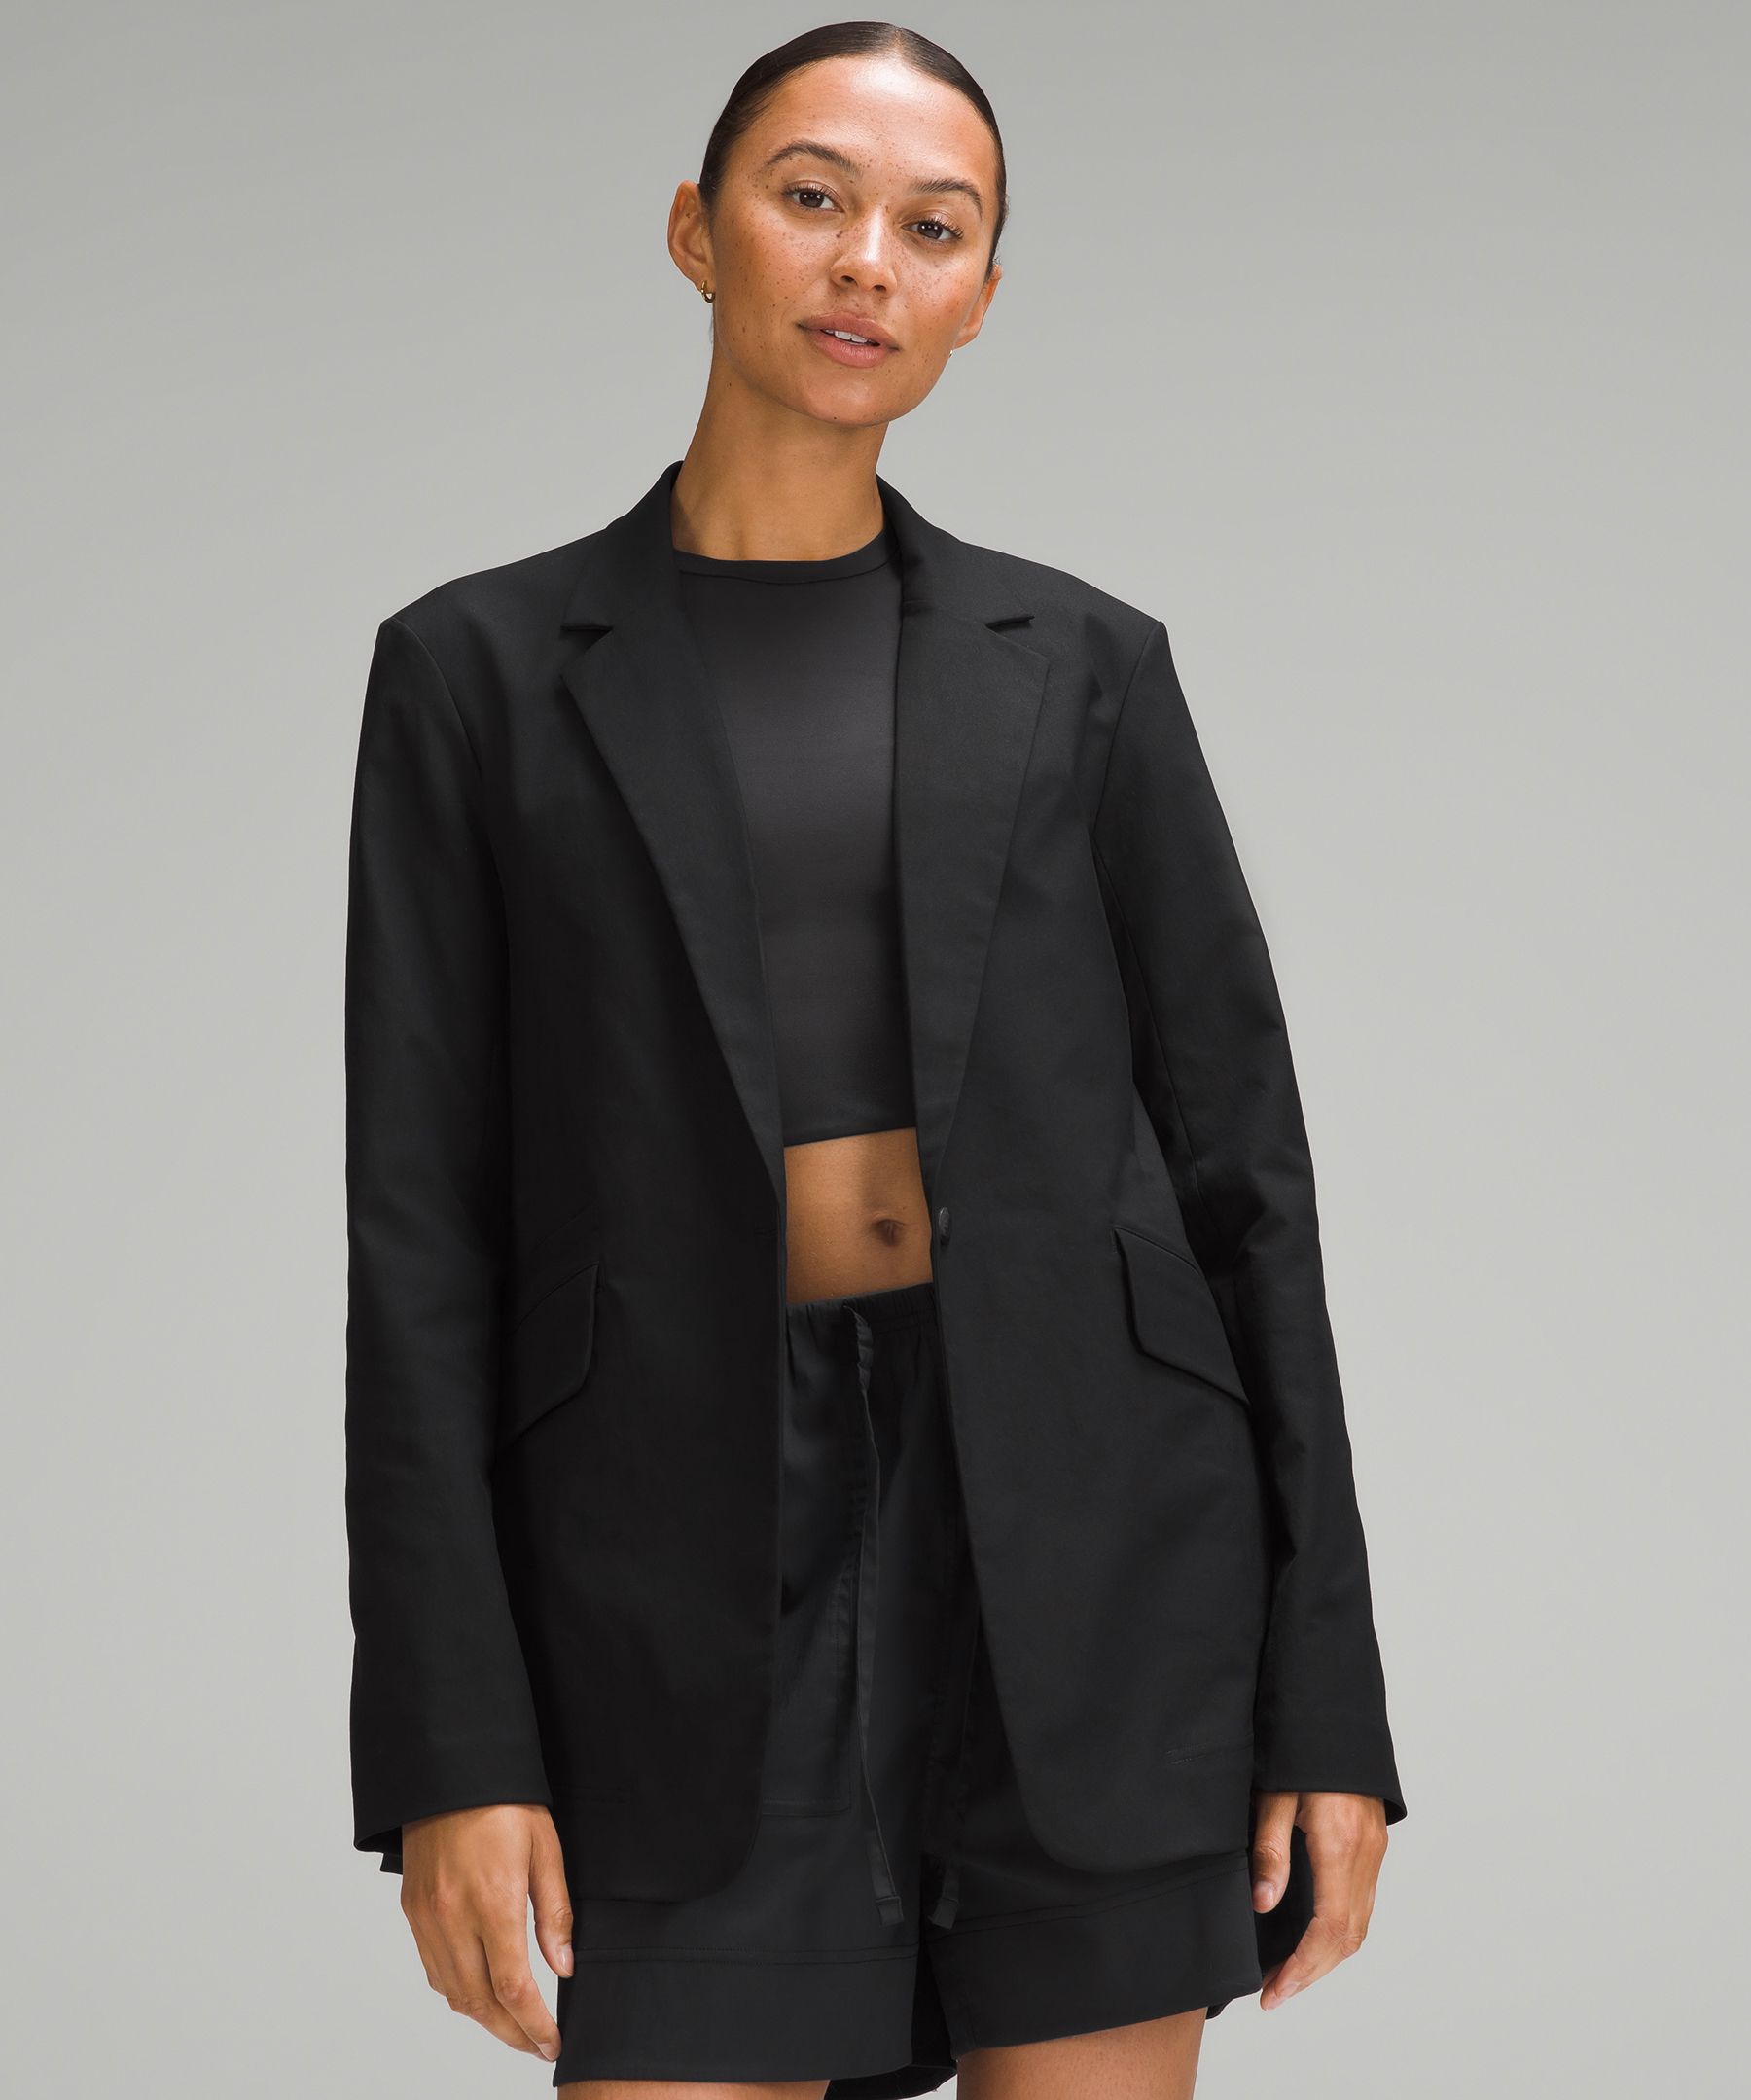 Lululemon athletica Relaxed-Fit Twill Blazer